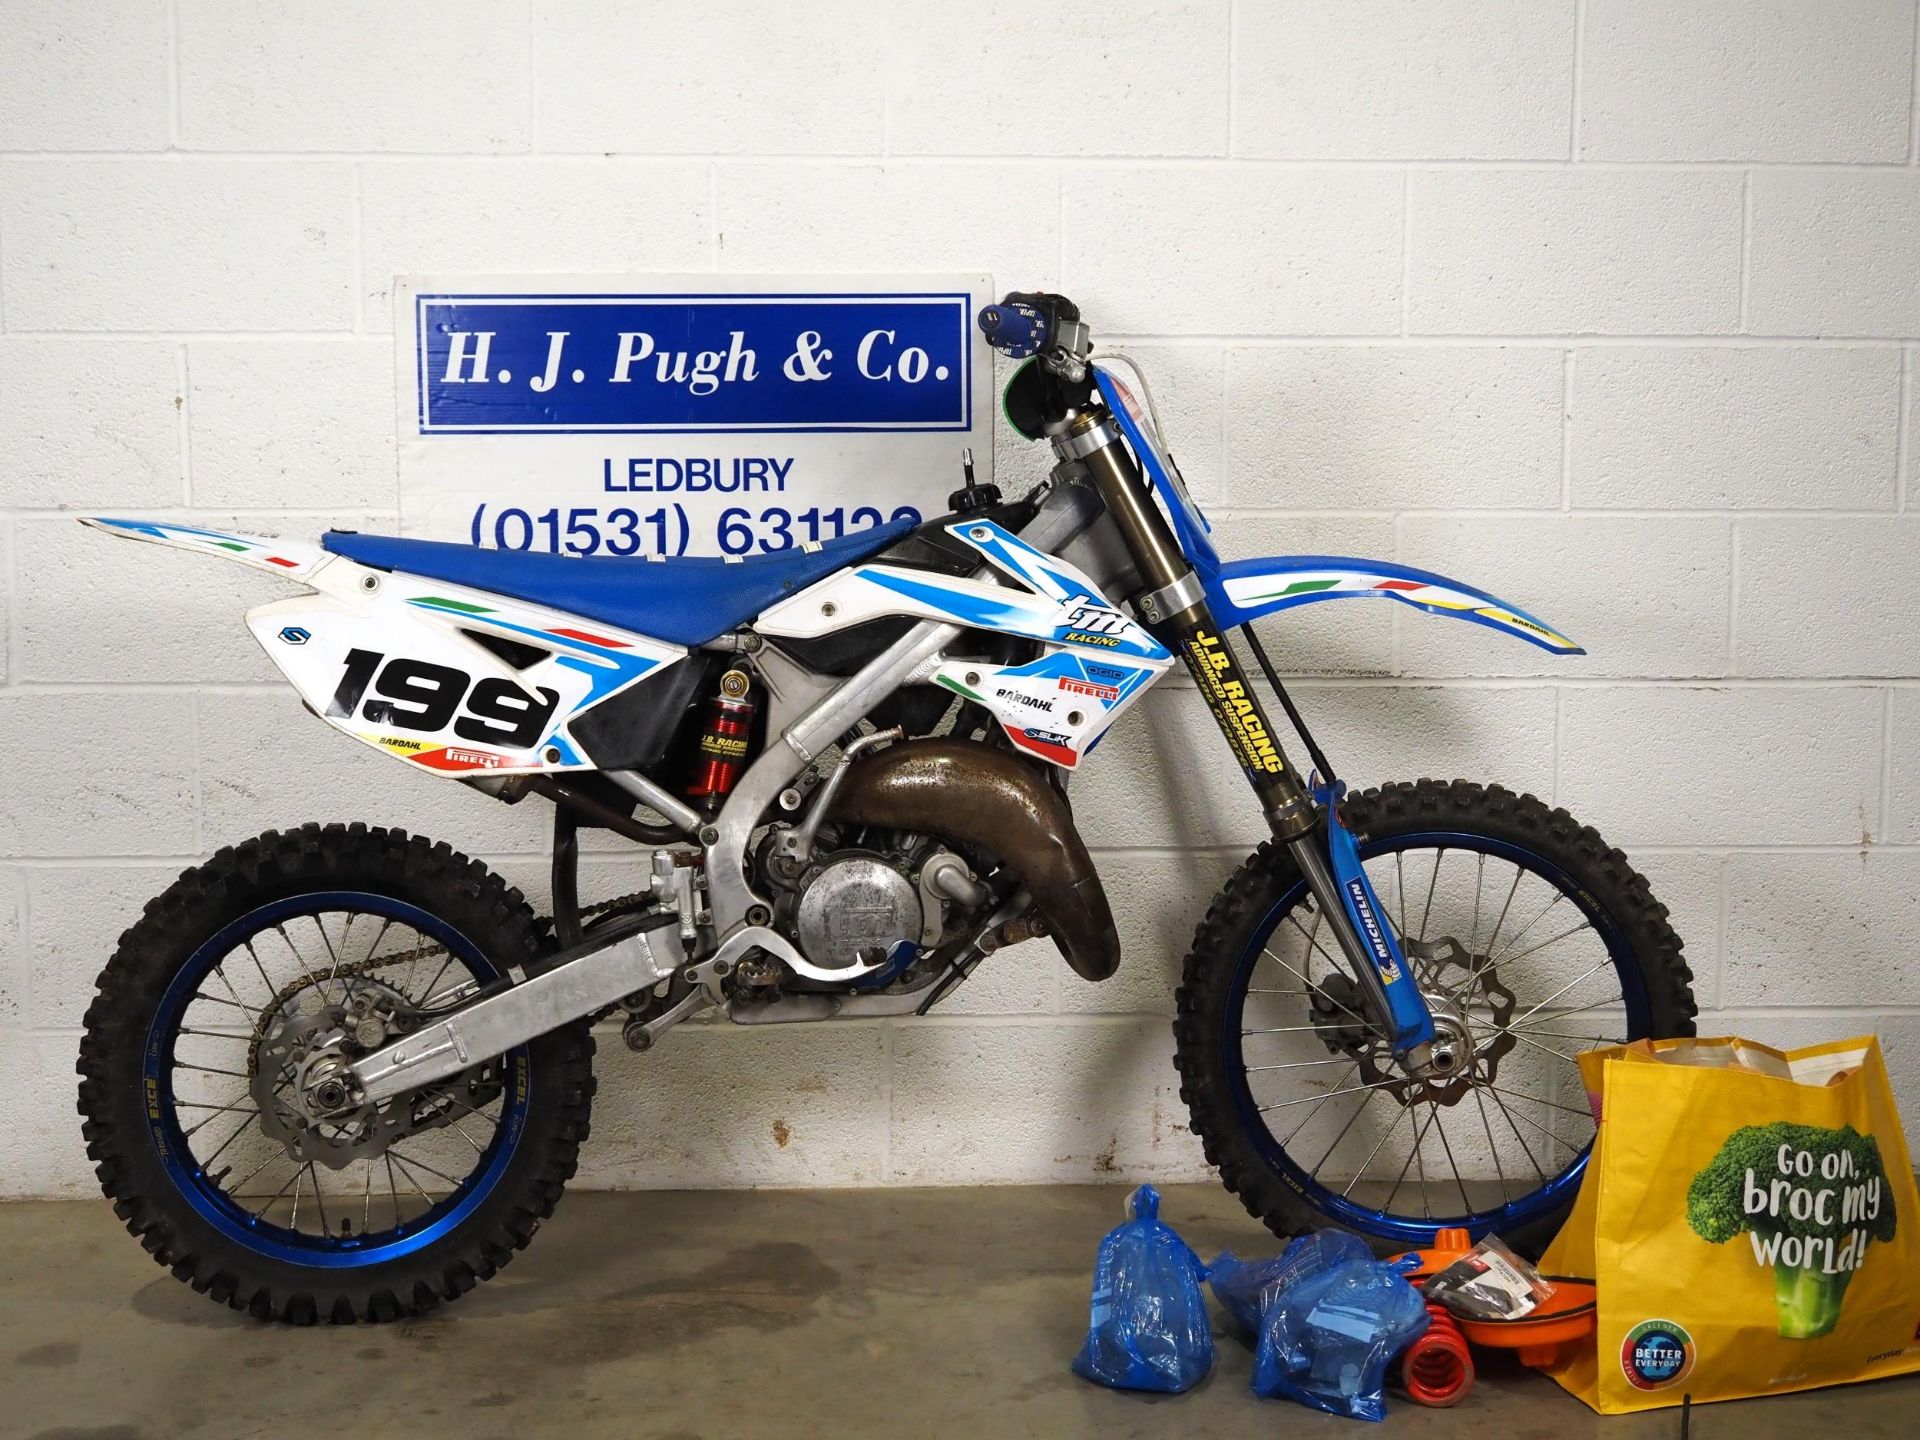 TM85 big wheel moto cross bike. 2015. 85cc Runs and rides. Has had an overhaul by Neil Buttry to